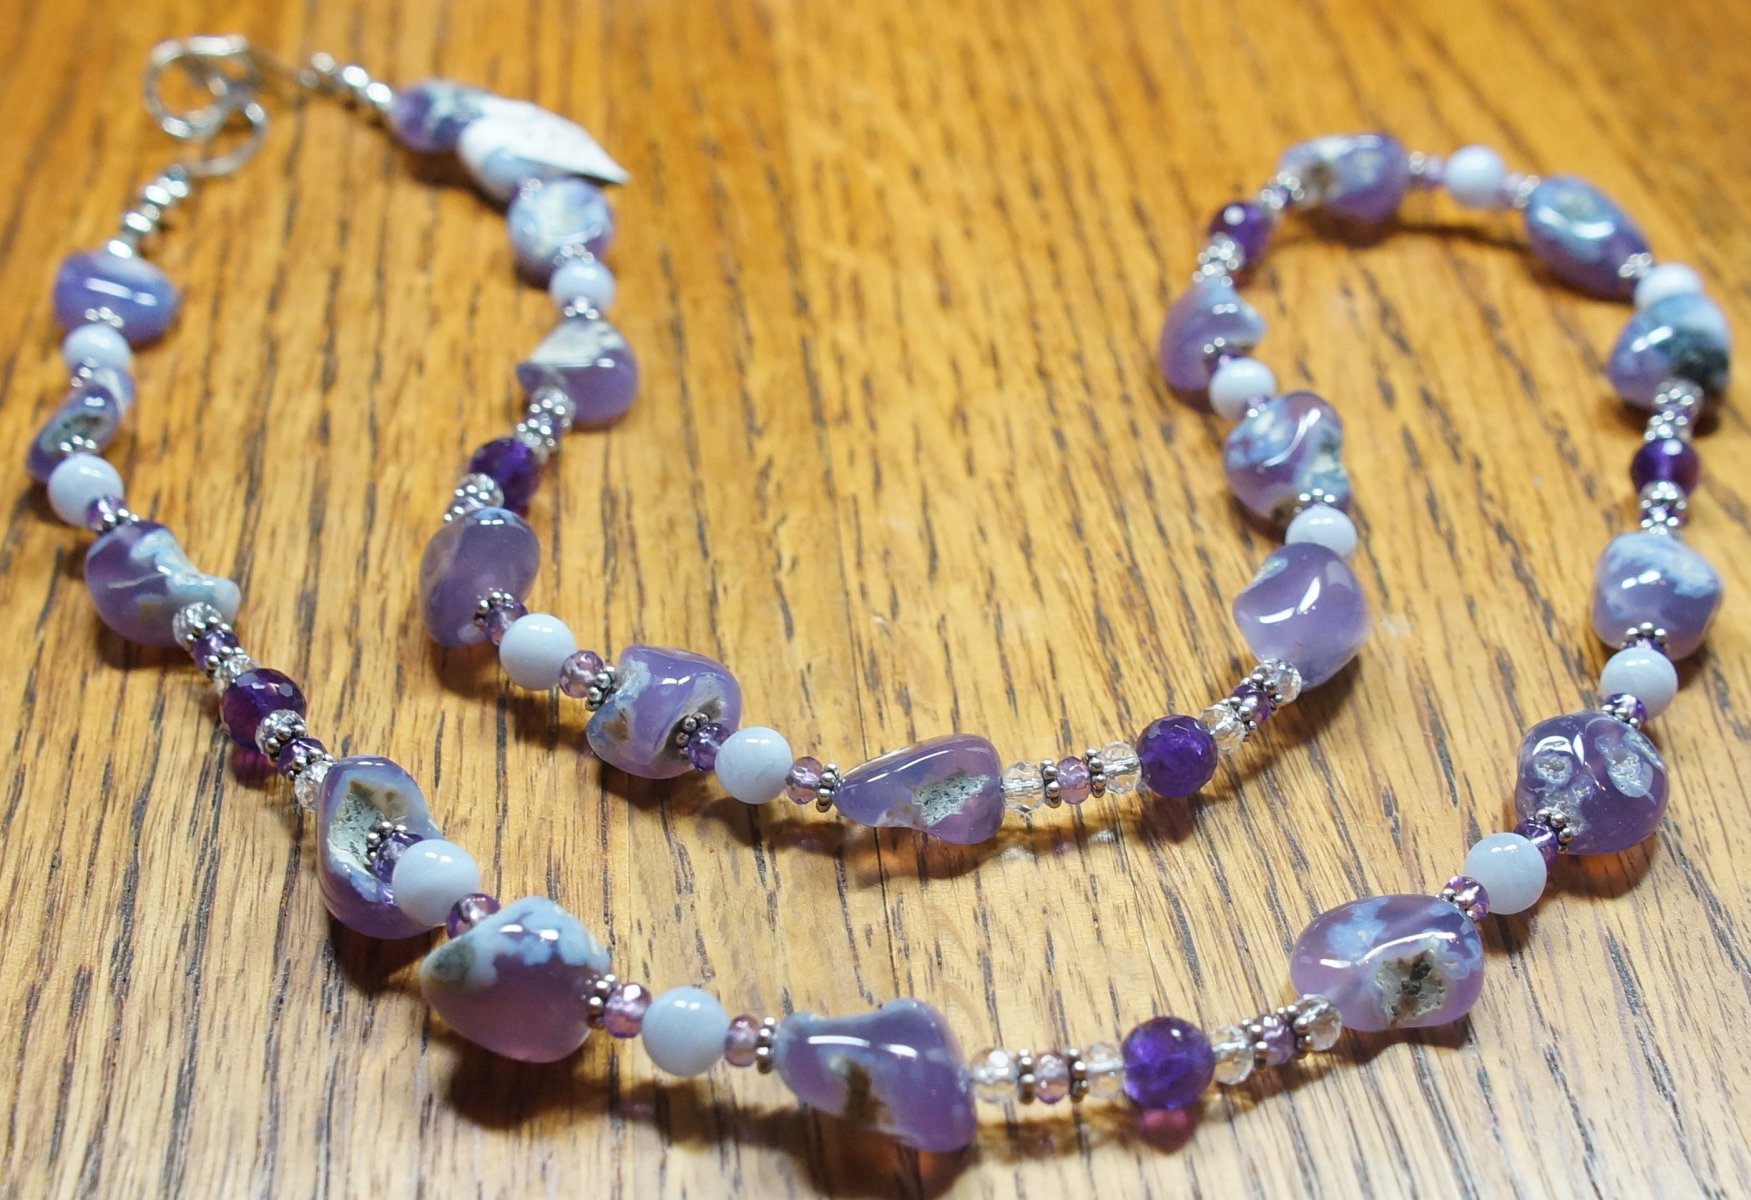 Scaled image Chalcedony Amethyst Blue Lace Agate.JPG: Item #20151214. $95. Purple Chalcedony, Blue Lace Agate, Amethyst and Quartz. Sterling Silver Bali Beads and Findings. 27.5 inches long.� 